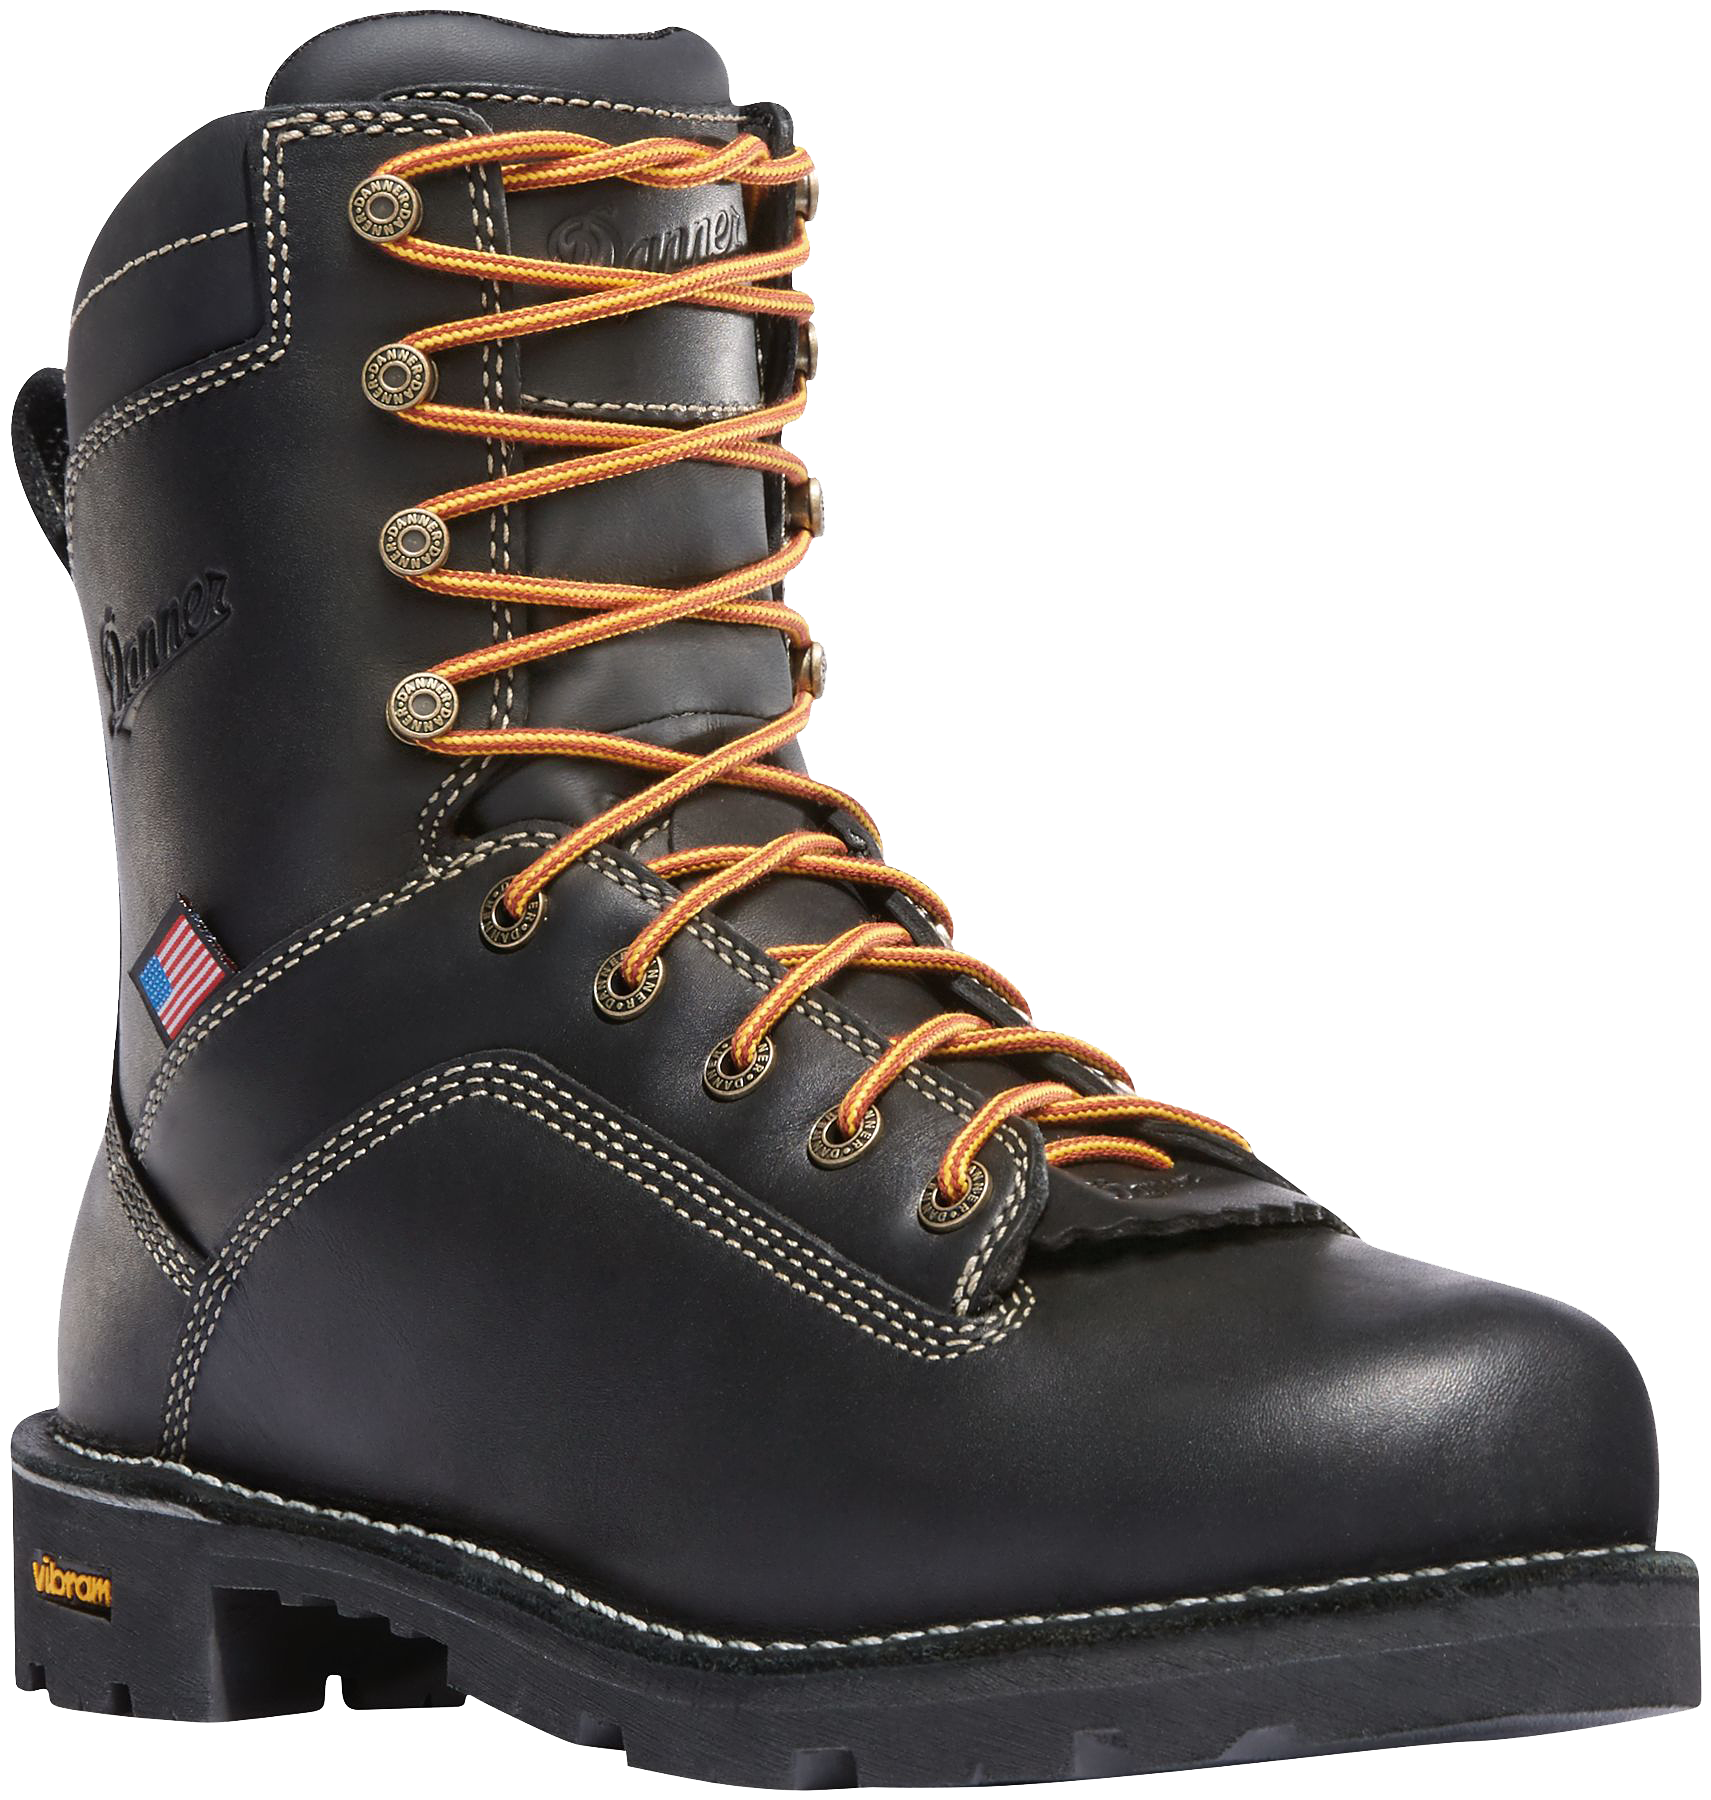 Danner Quarry USA Brown GORE-TEX Alloy Toe Work Boots for Men - Black - 11.5M